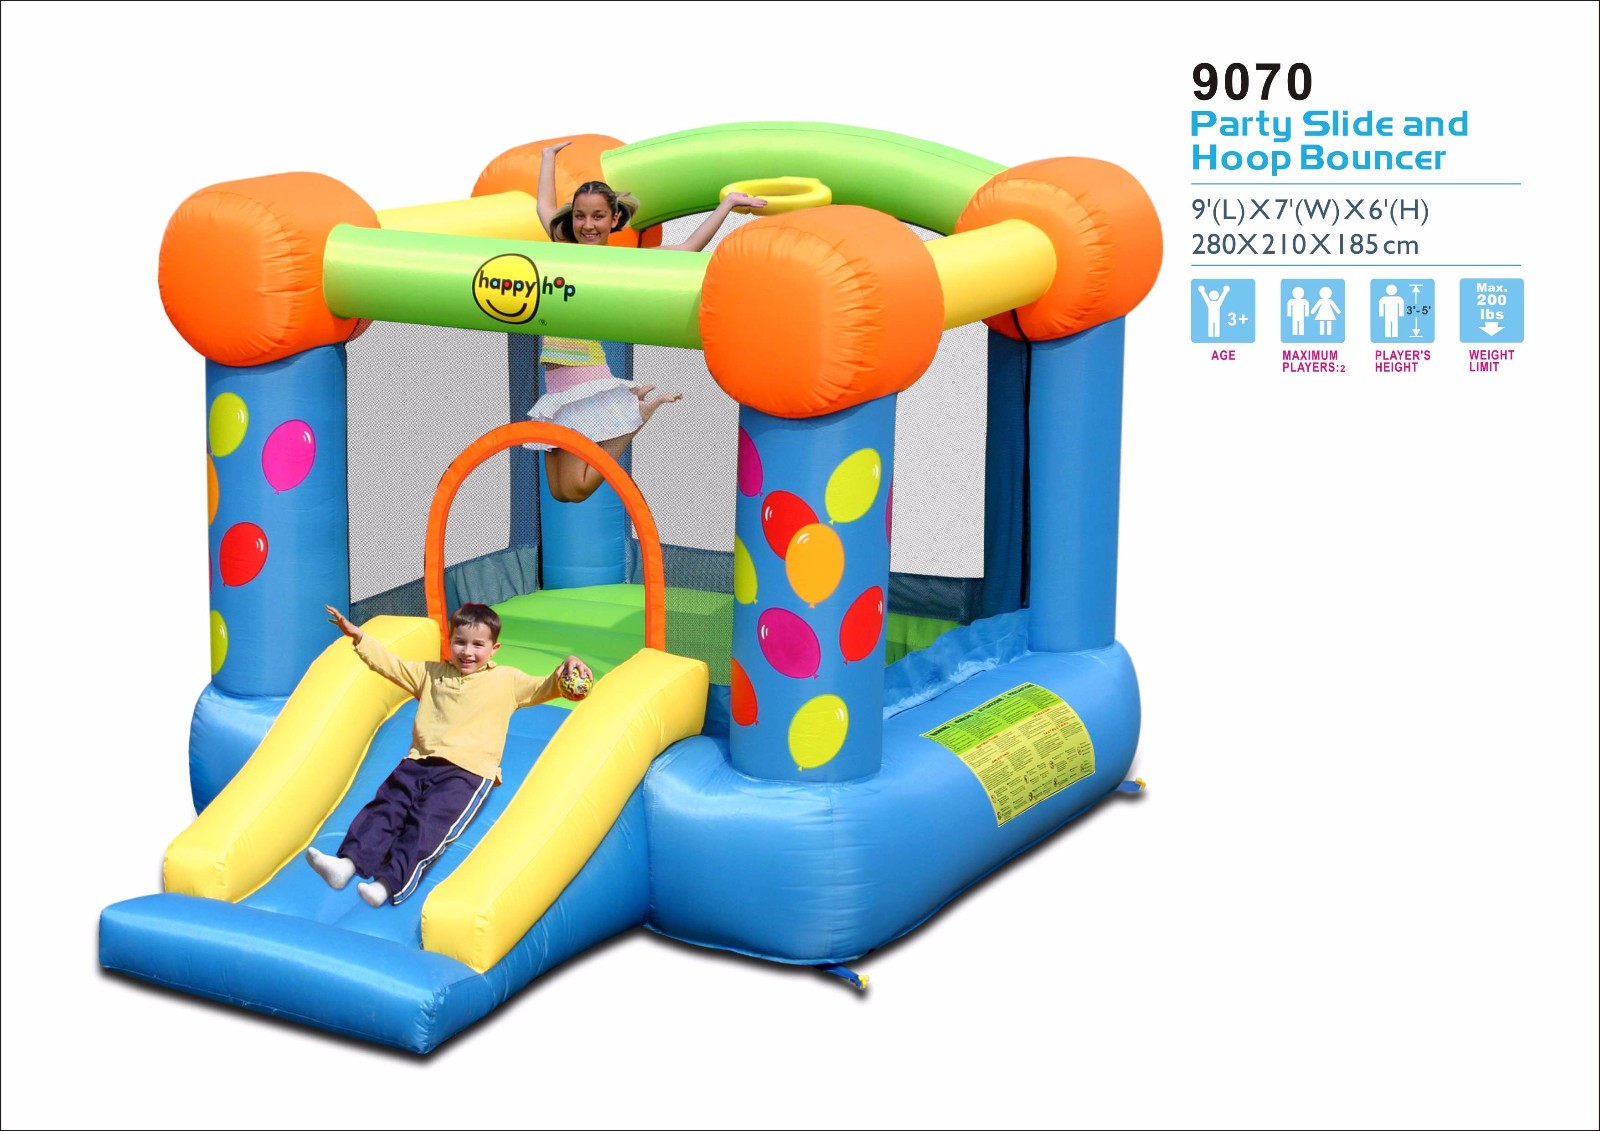 9070-Party Slide and Hoop Bouncer